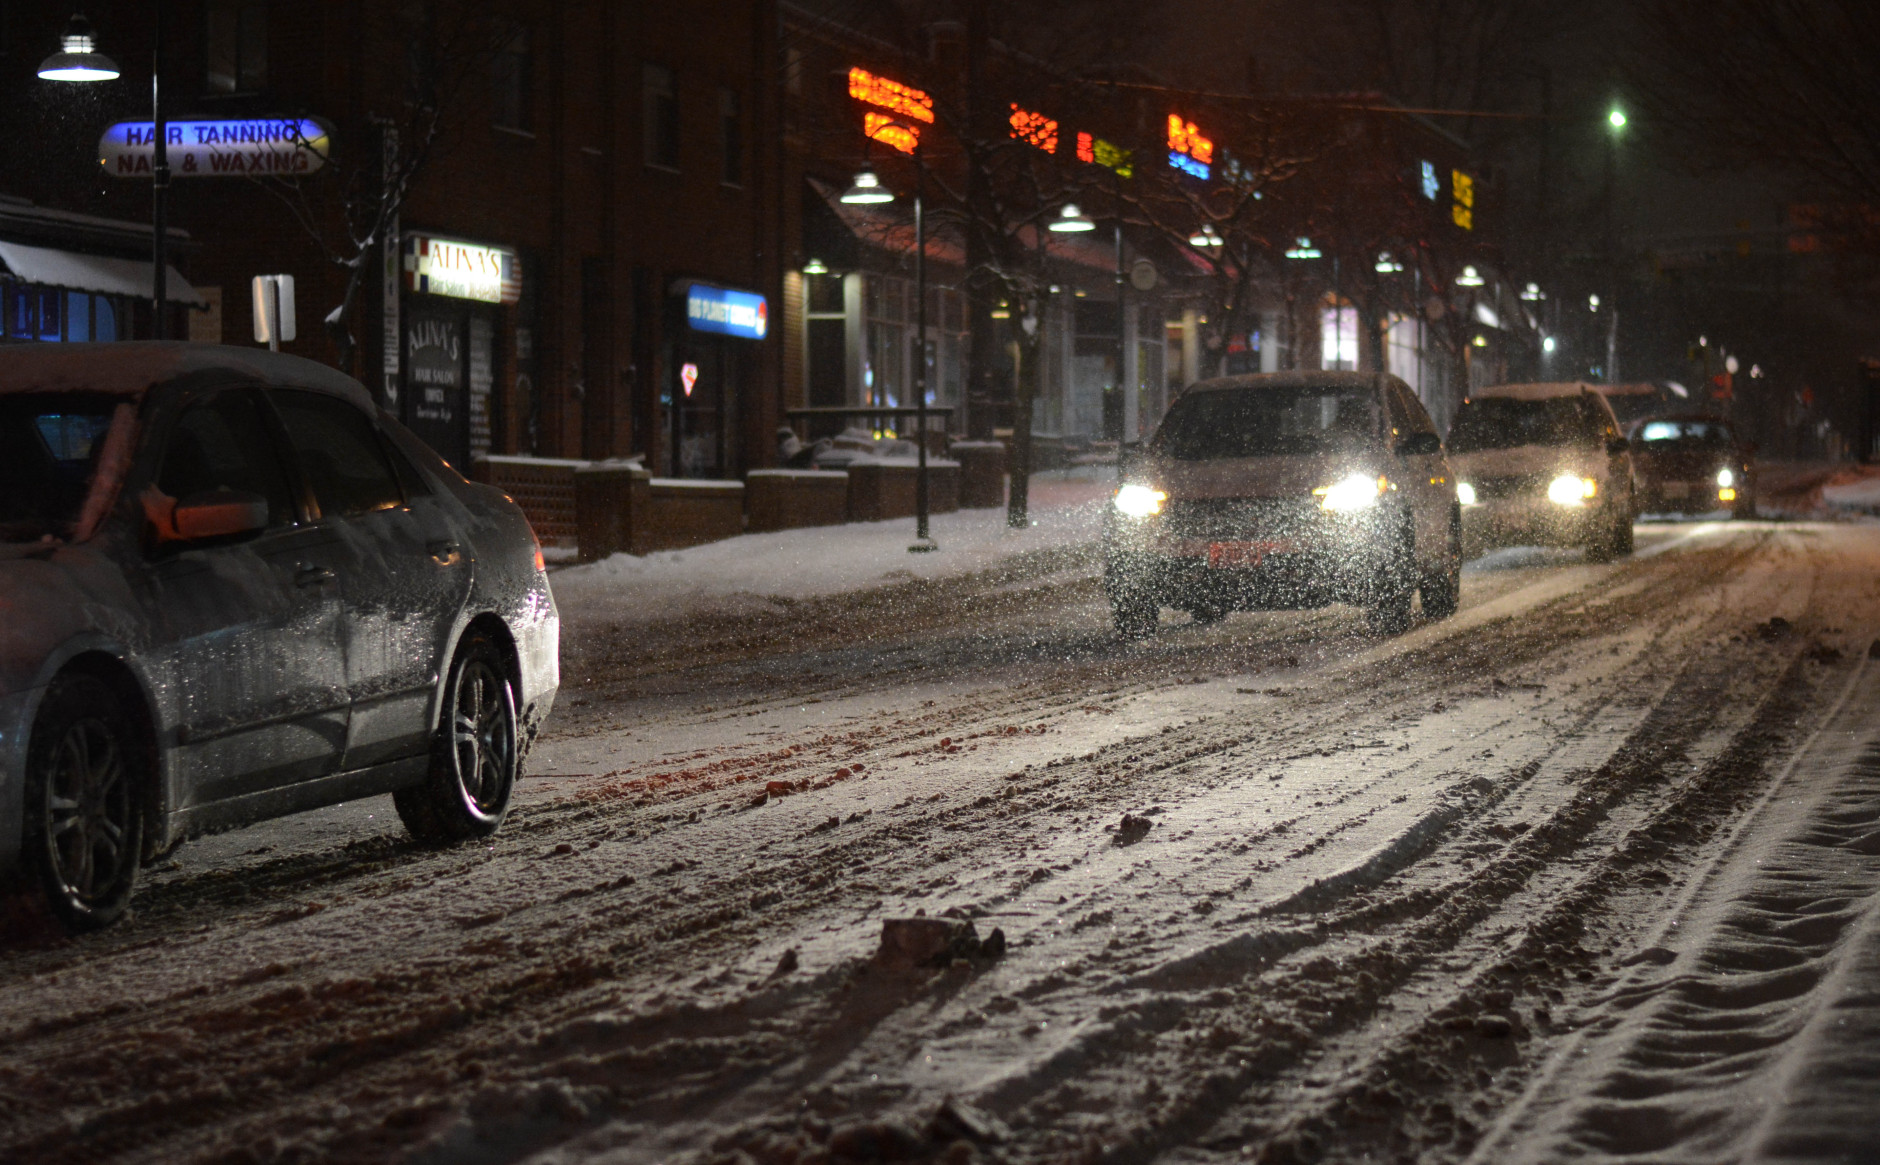 College Park, Md., at about 2 a.m. Tuesday, Feb. 17, 2015. (WTOP/Tim Drummond)